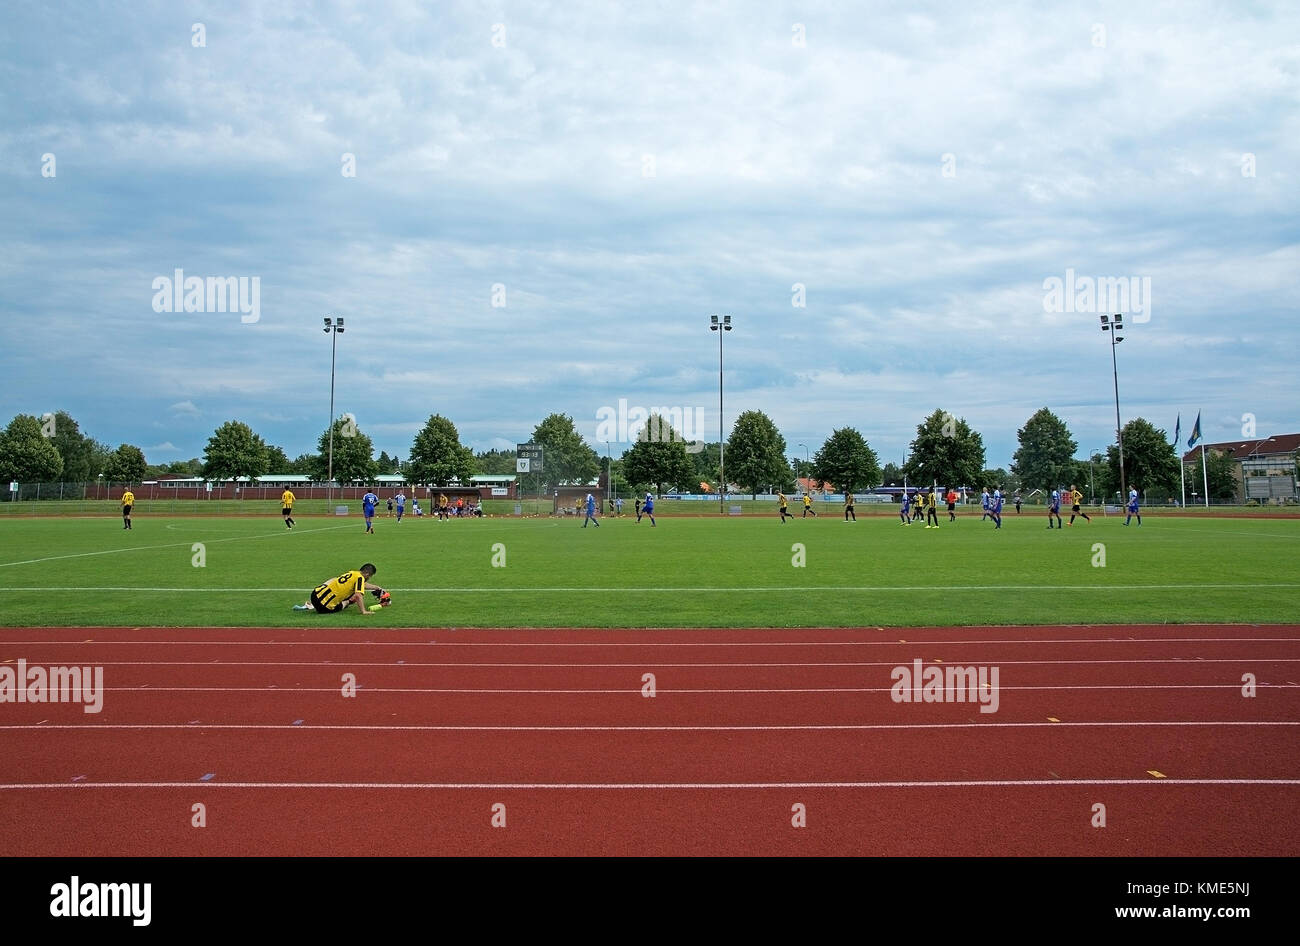 SPANGA, STOCKHOLM, SWEDEN - AUGUST 8, 2015: Soccer game at Spanga IP between home team Spanga IP and Ursvik in 4th division North on August 8, 2015 in Stock Photo